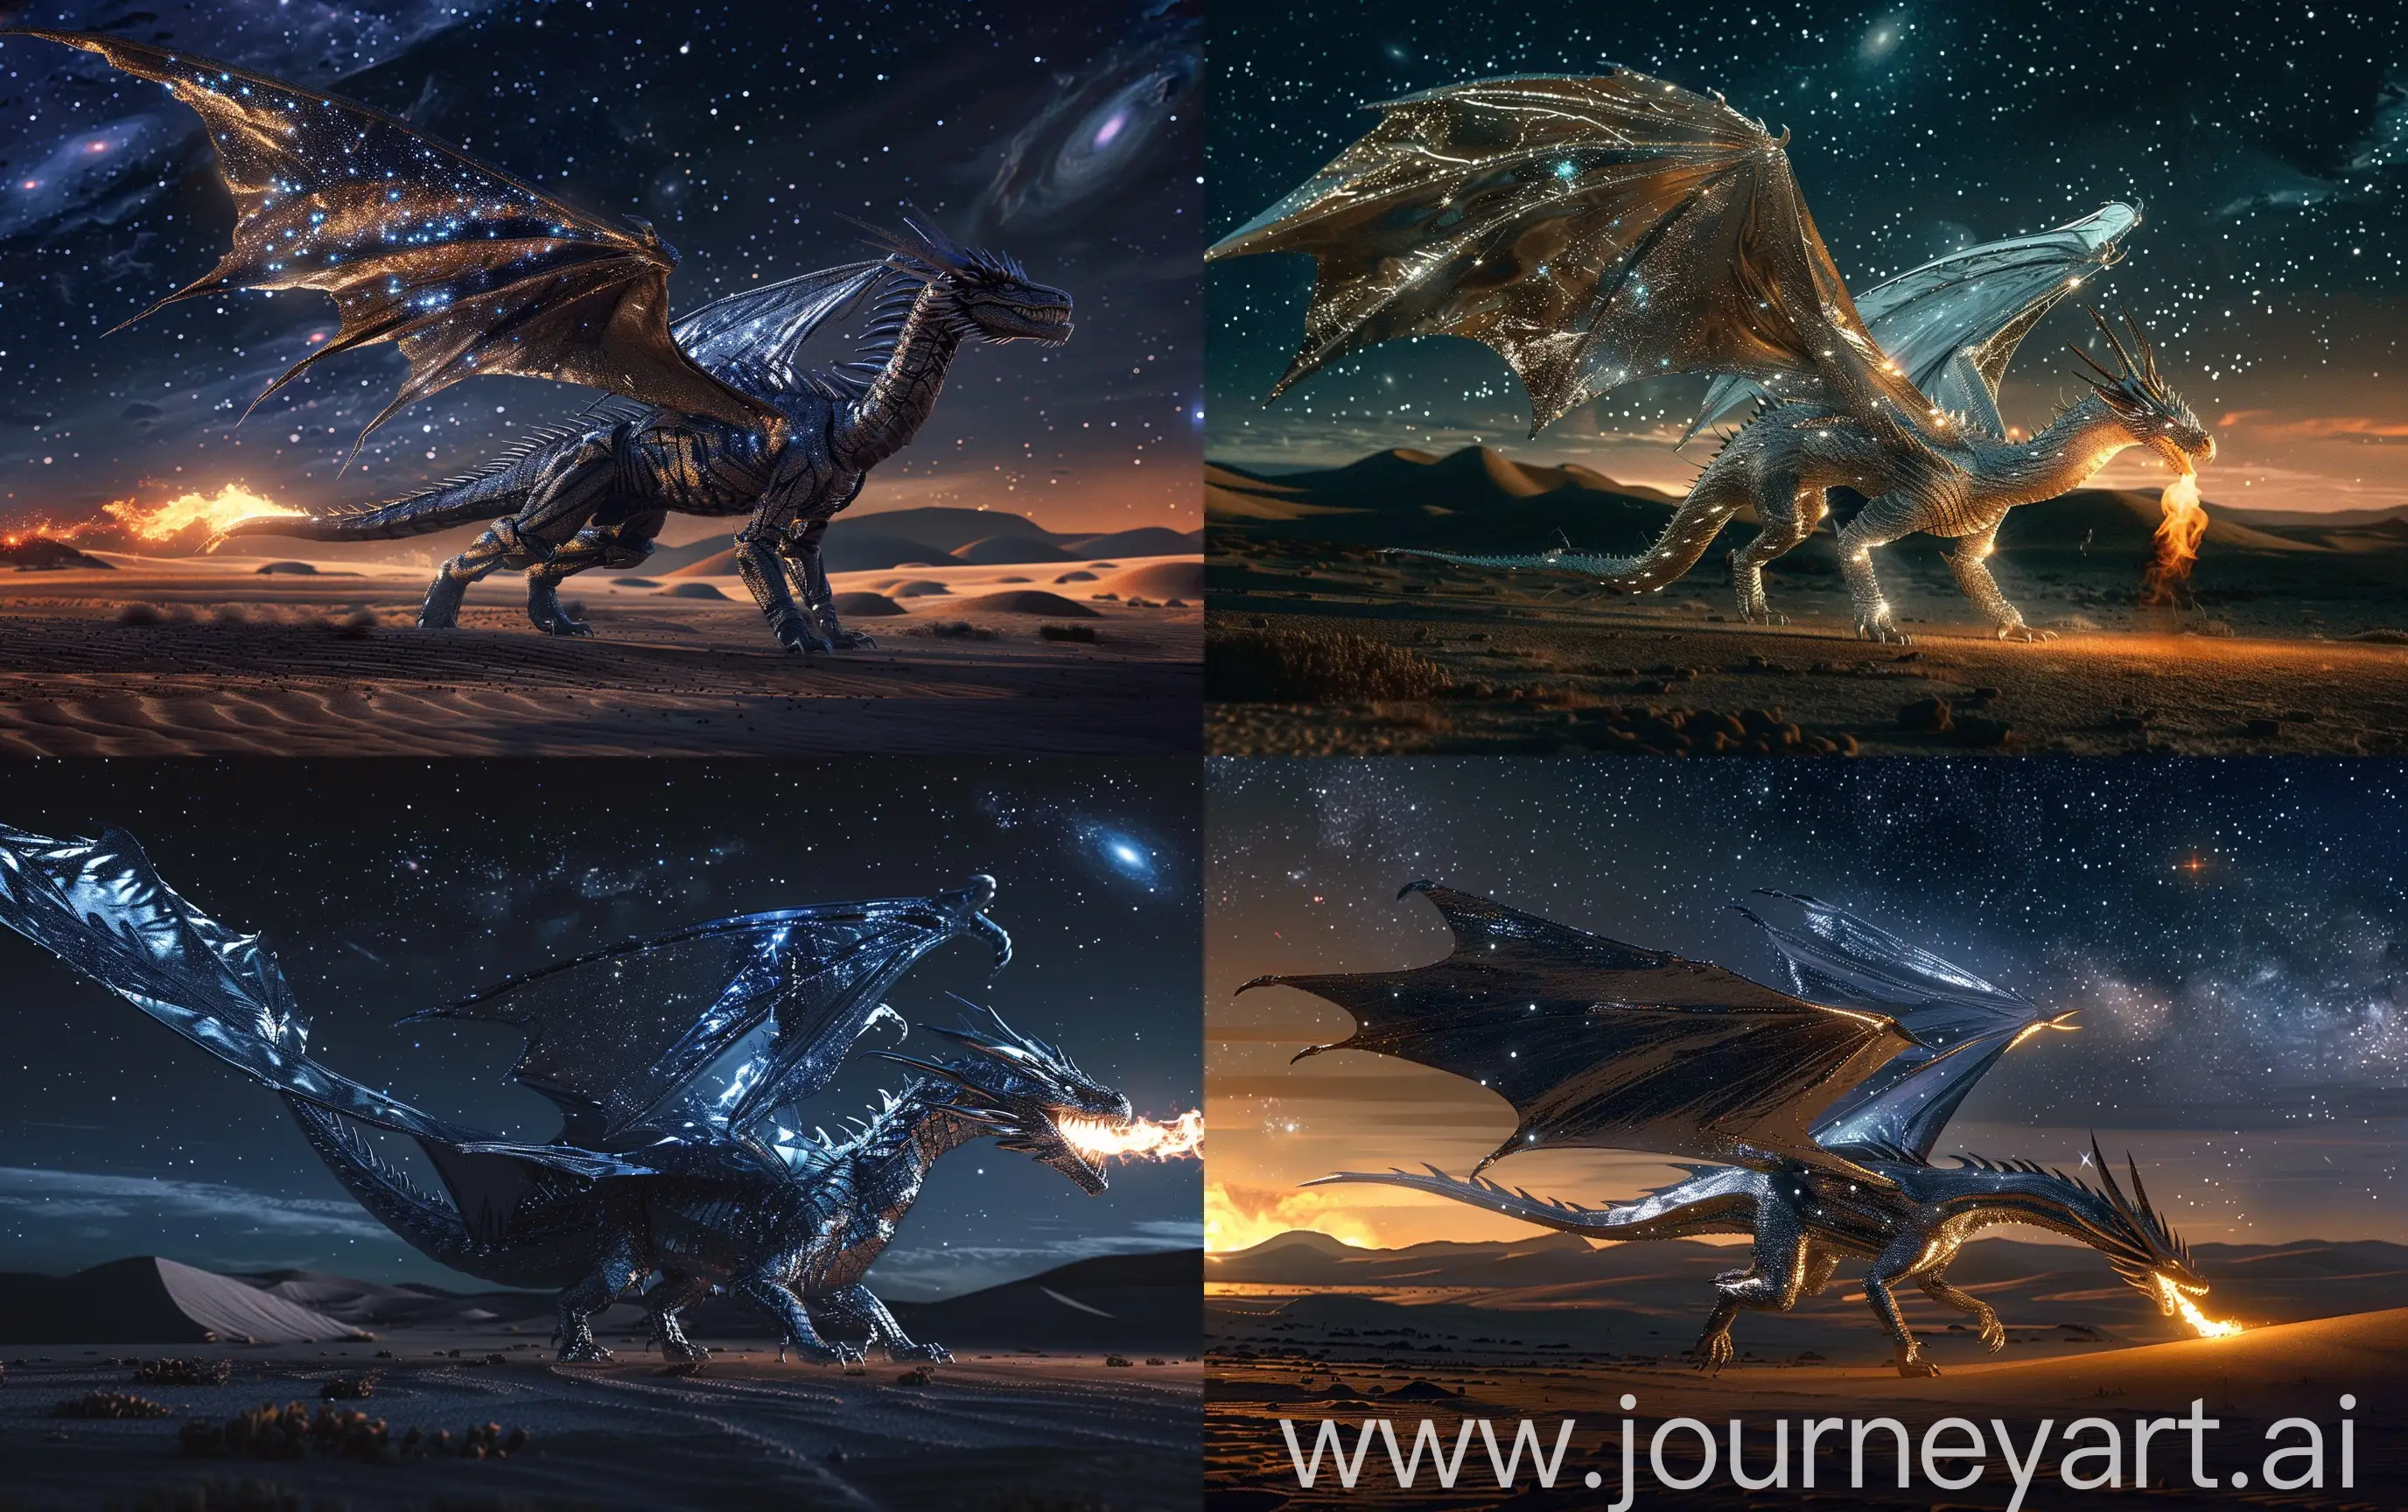 The big winged dragon which is made of luquid metal reflecting galaxies, it spews a flame, it walks through the dark desert with small hills in the night, in the sky is deep space with galaxies and Betelgeuse star, realistic, cinematic --ar 16:10